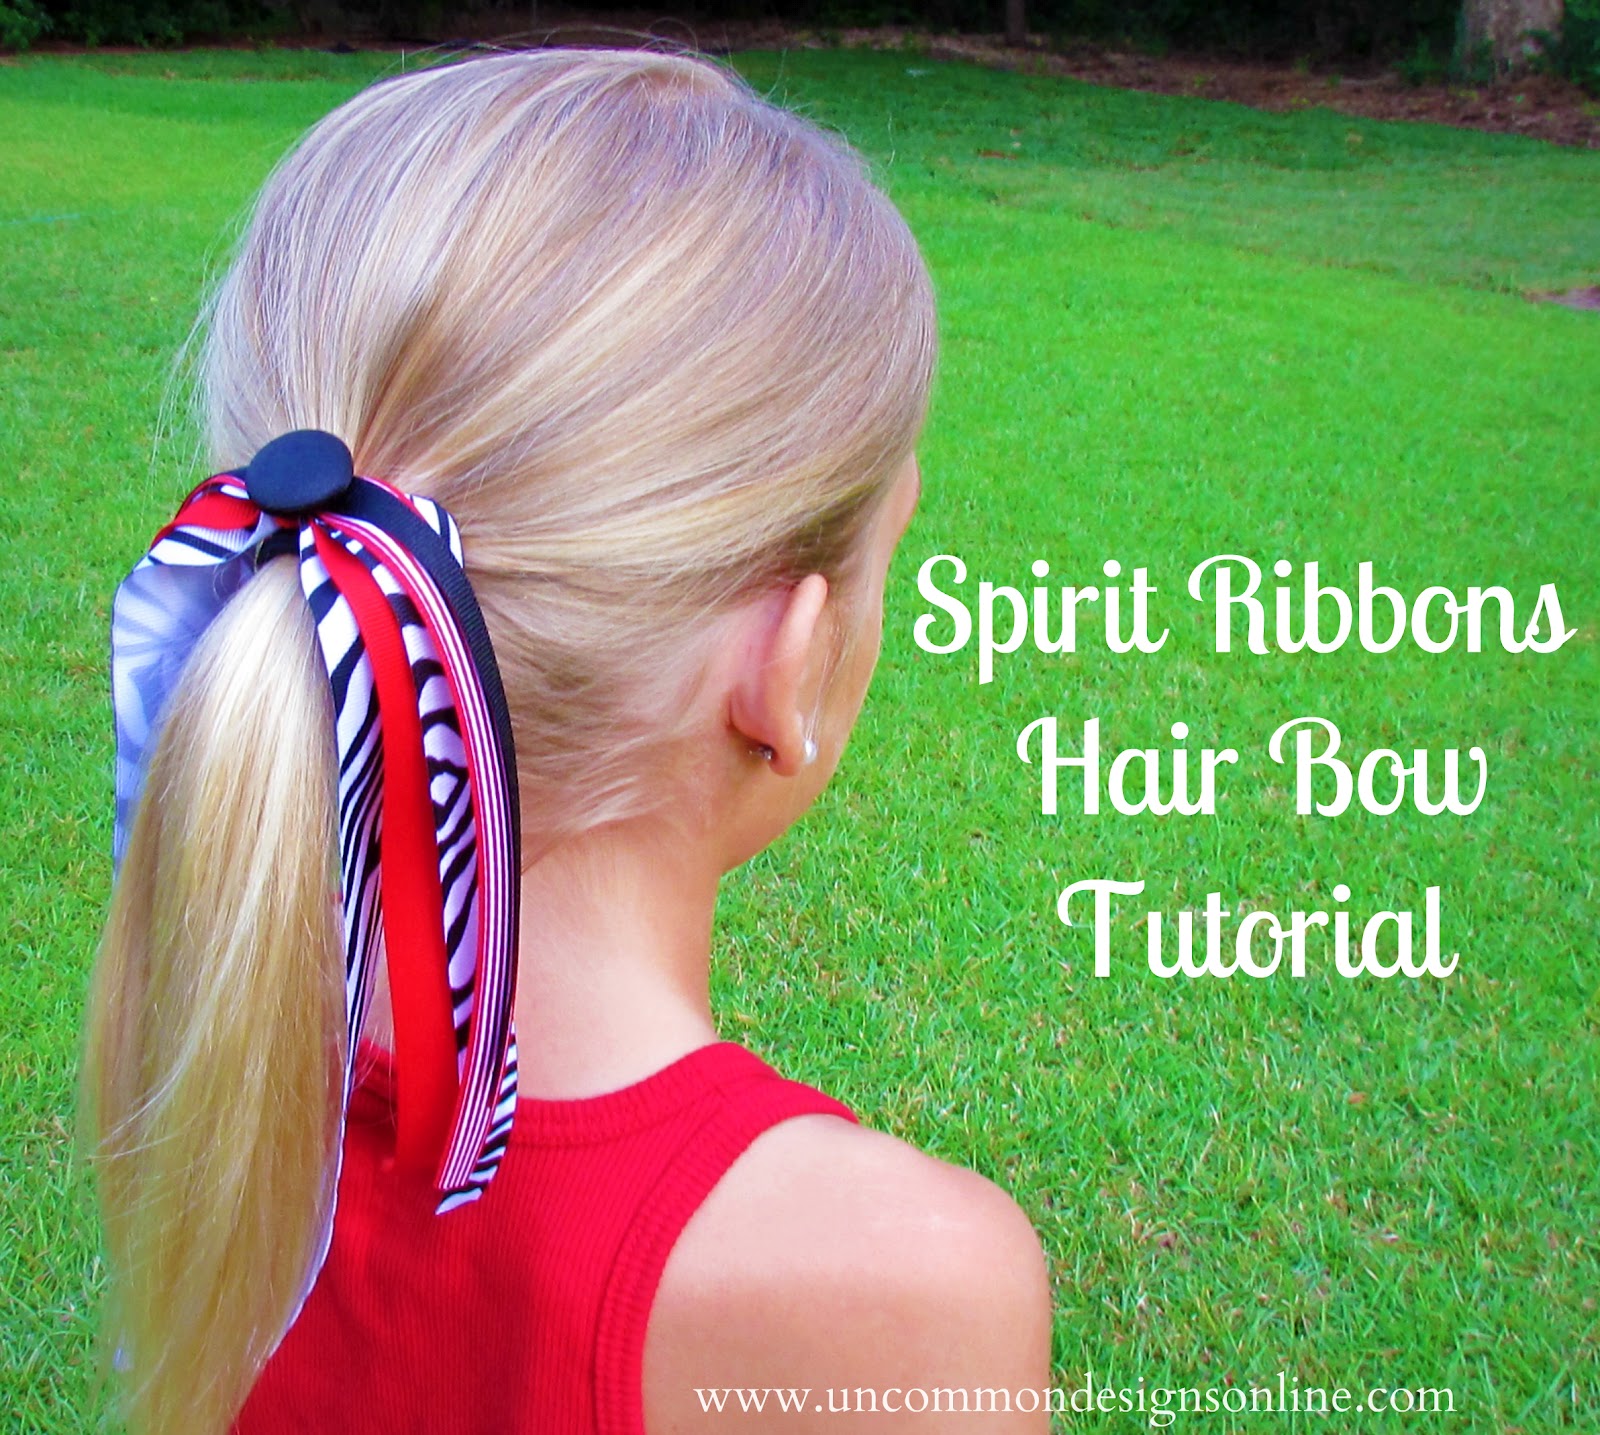 Hair Bow Tutorial / Bow out of Ribbon / How to Make Bows with